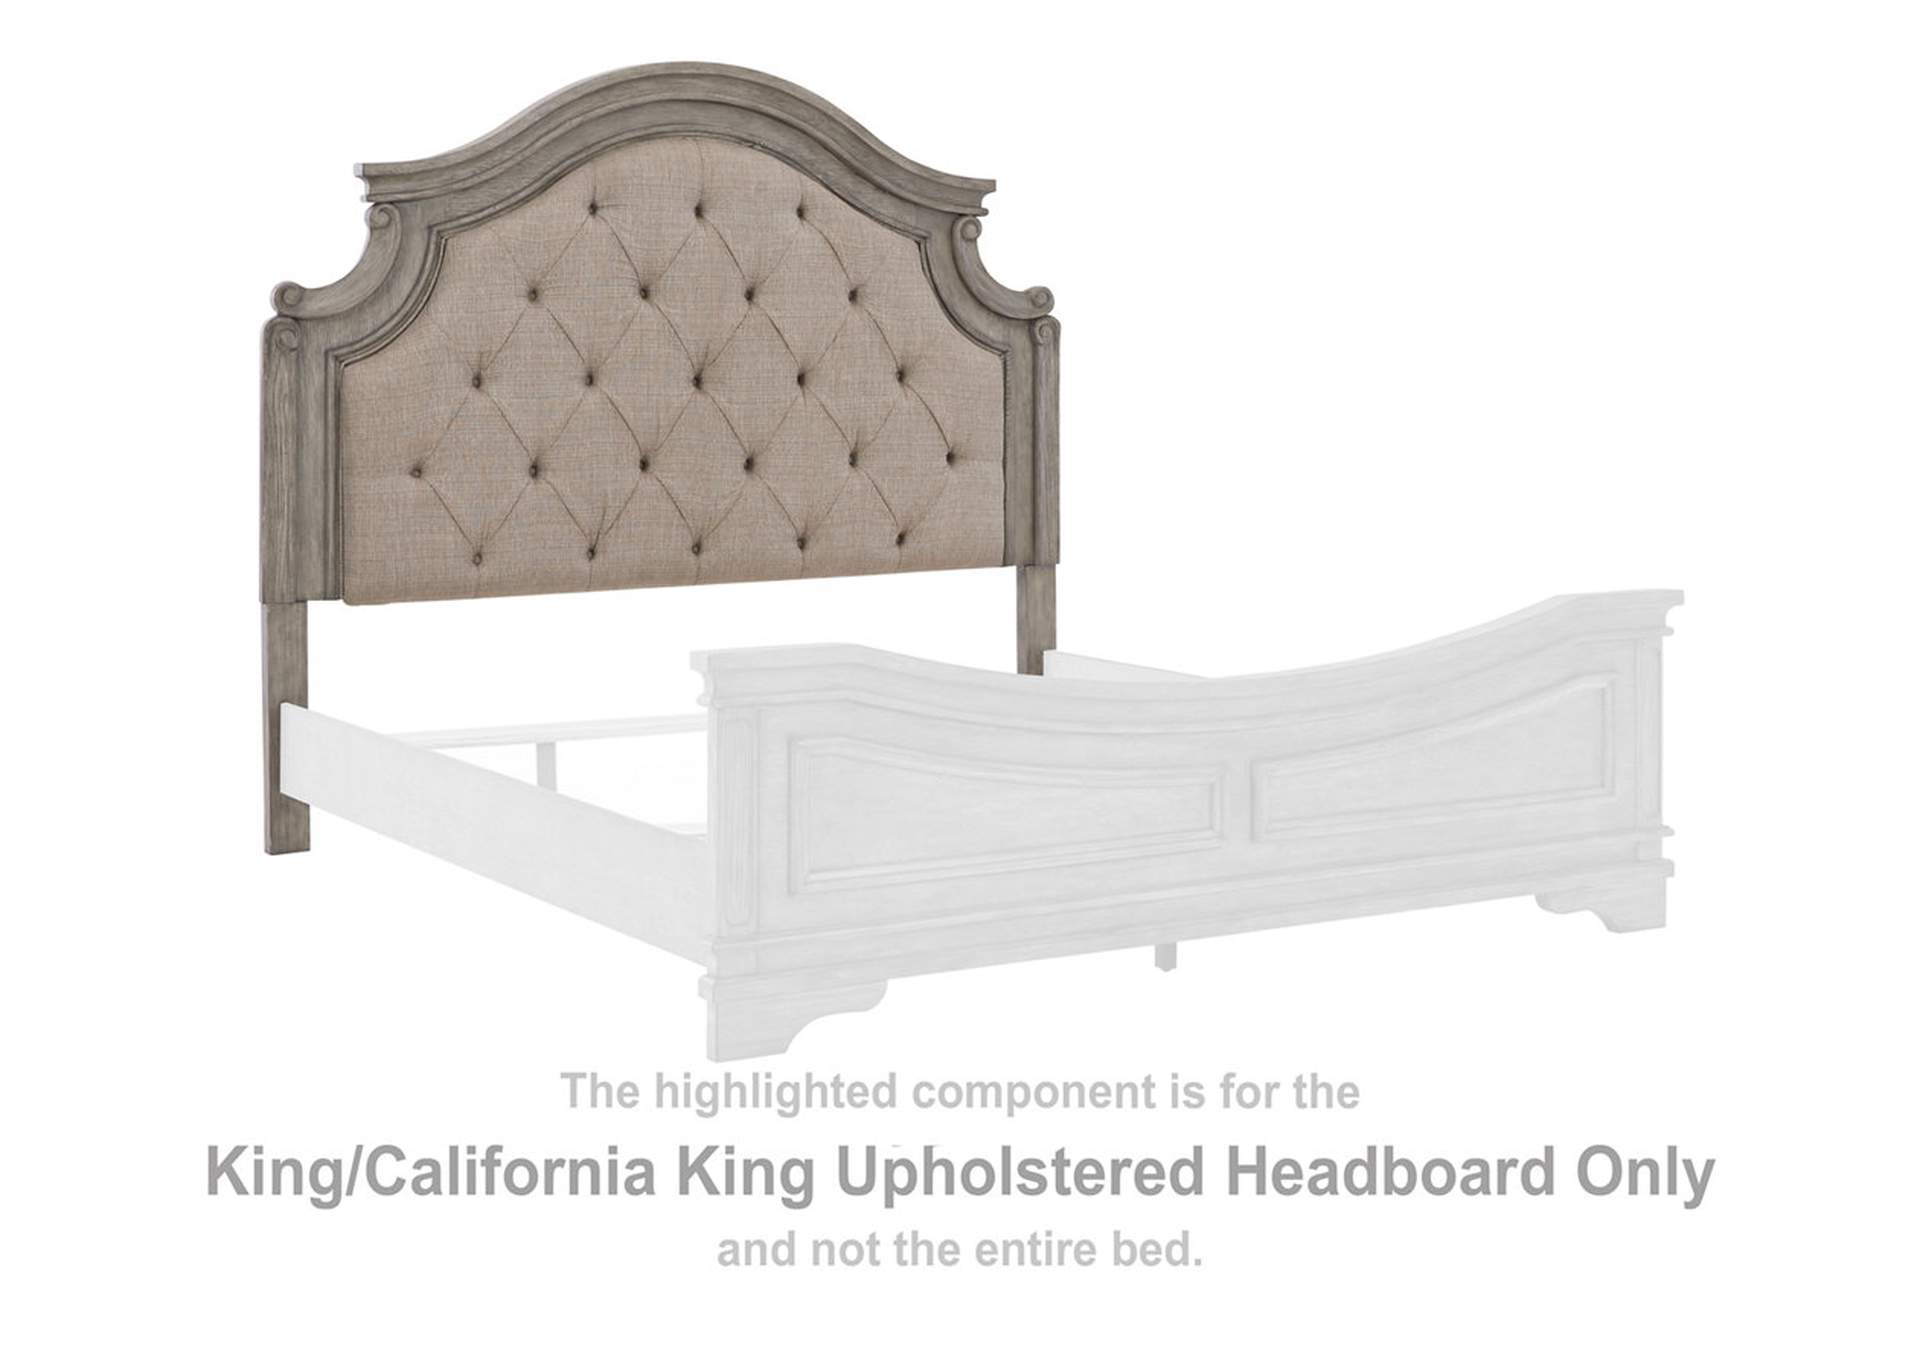 Lodenbay California King Panel Bed,Signature Design By Ashley